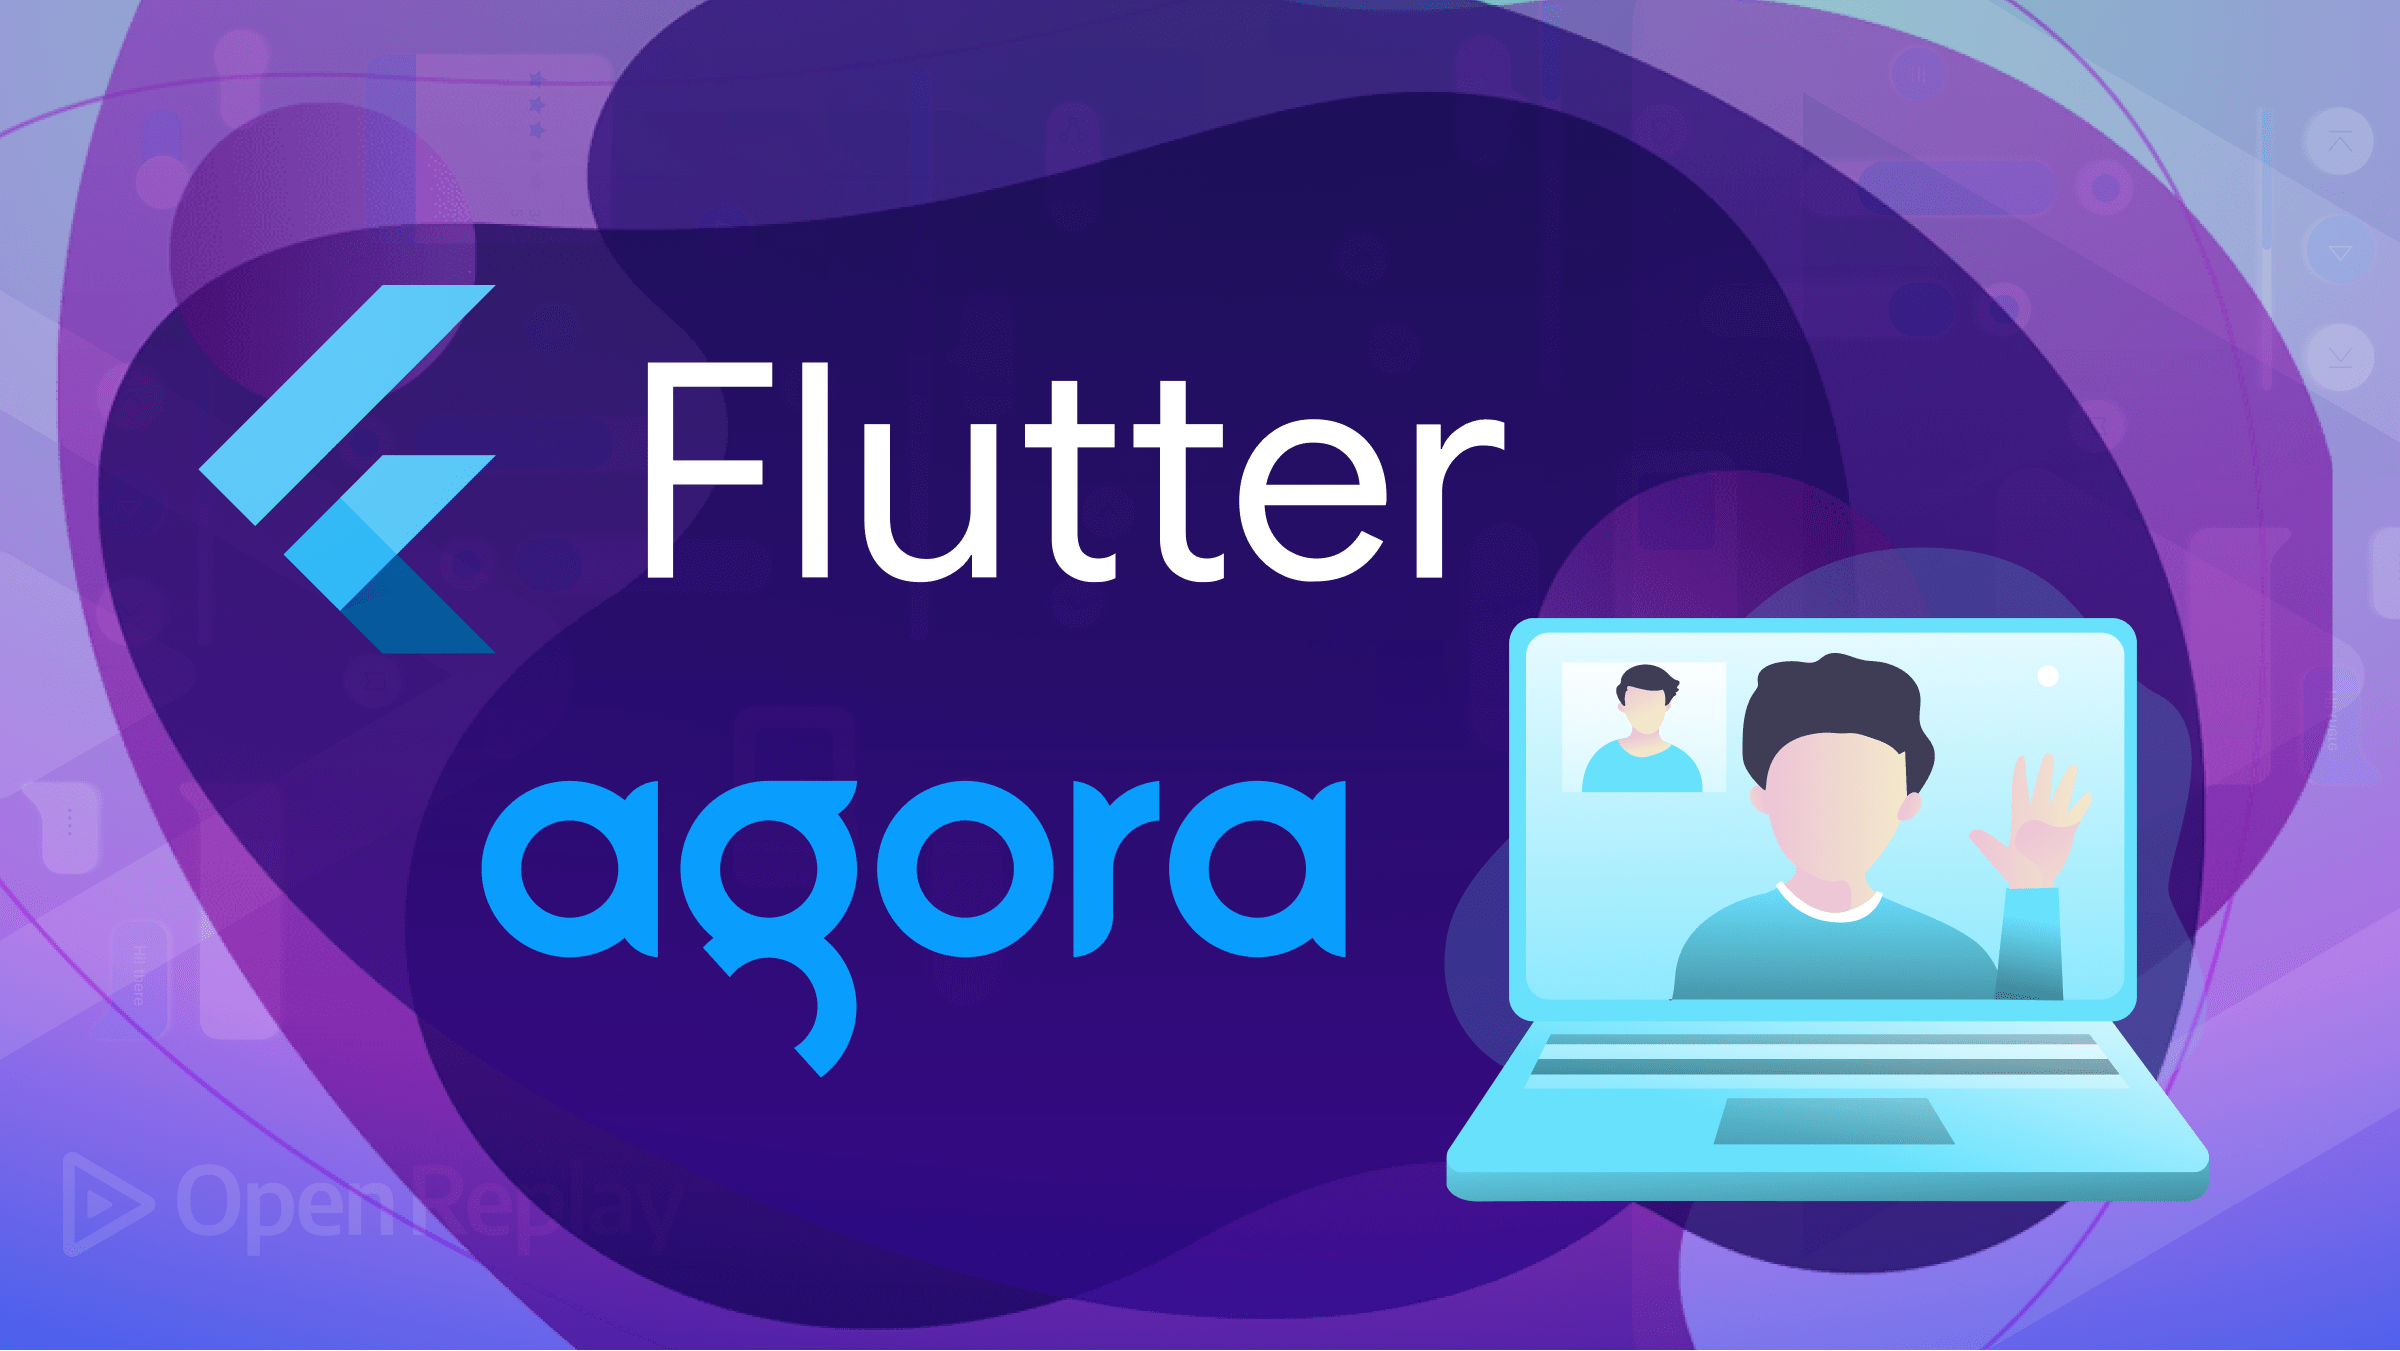 One-to-one video calls with Flutter and Agora